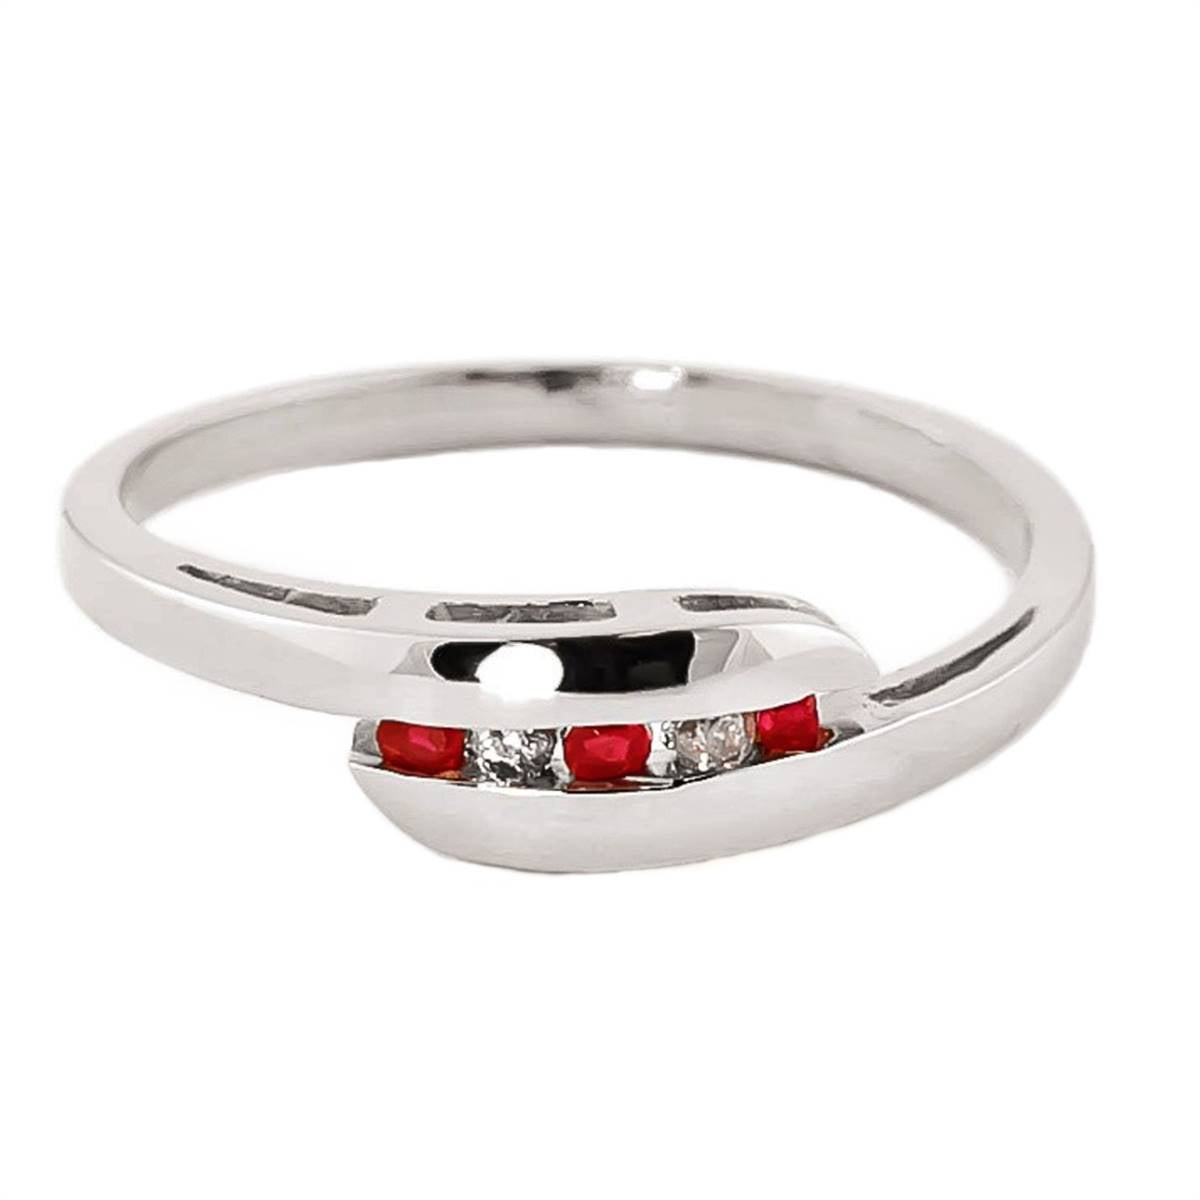 0.25 Carat 14K Solid White Gold Ring Channel Set Diamond Ruby